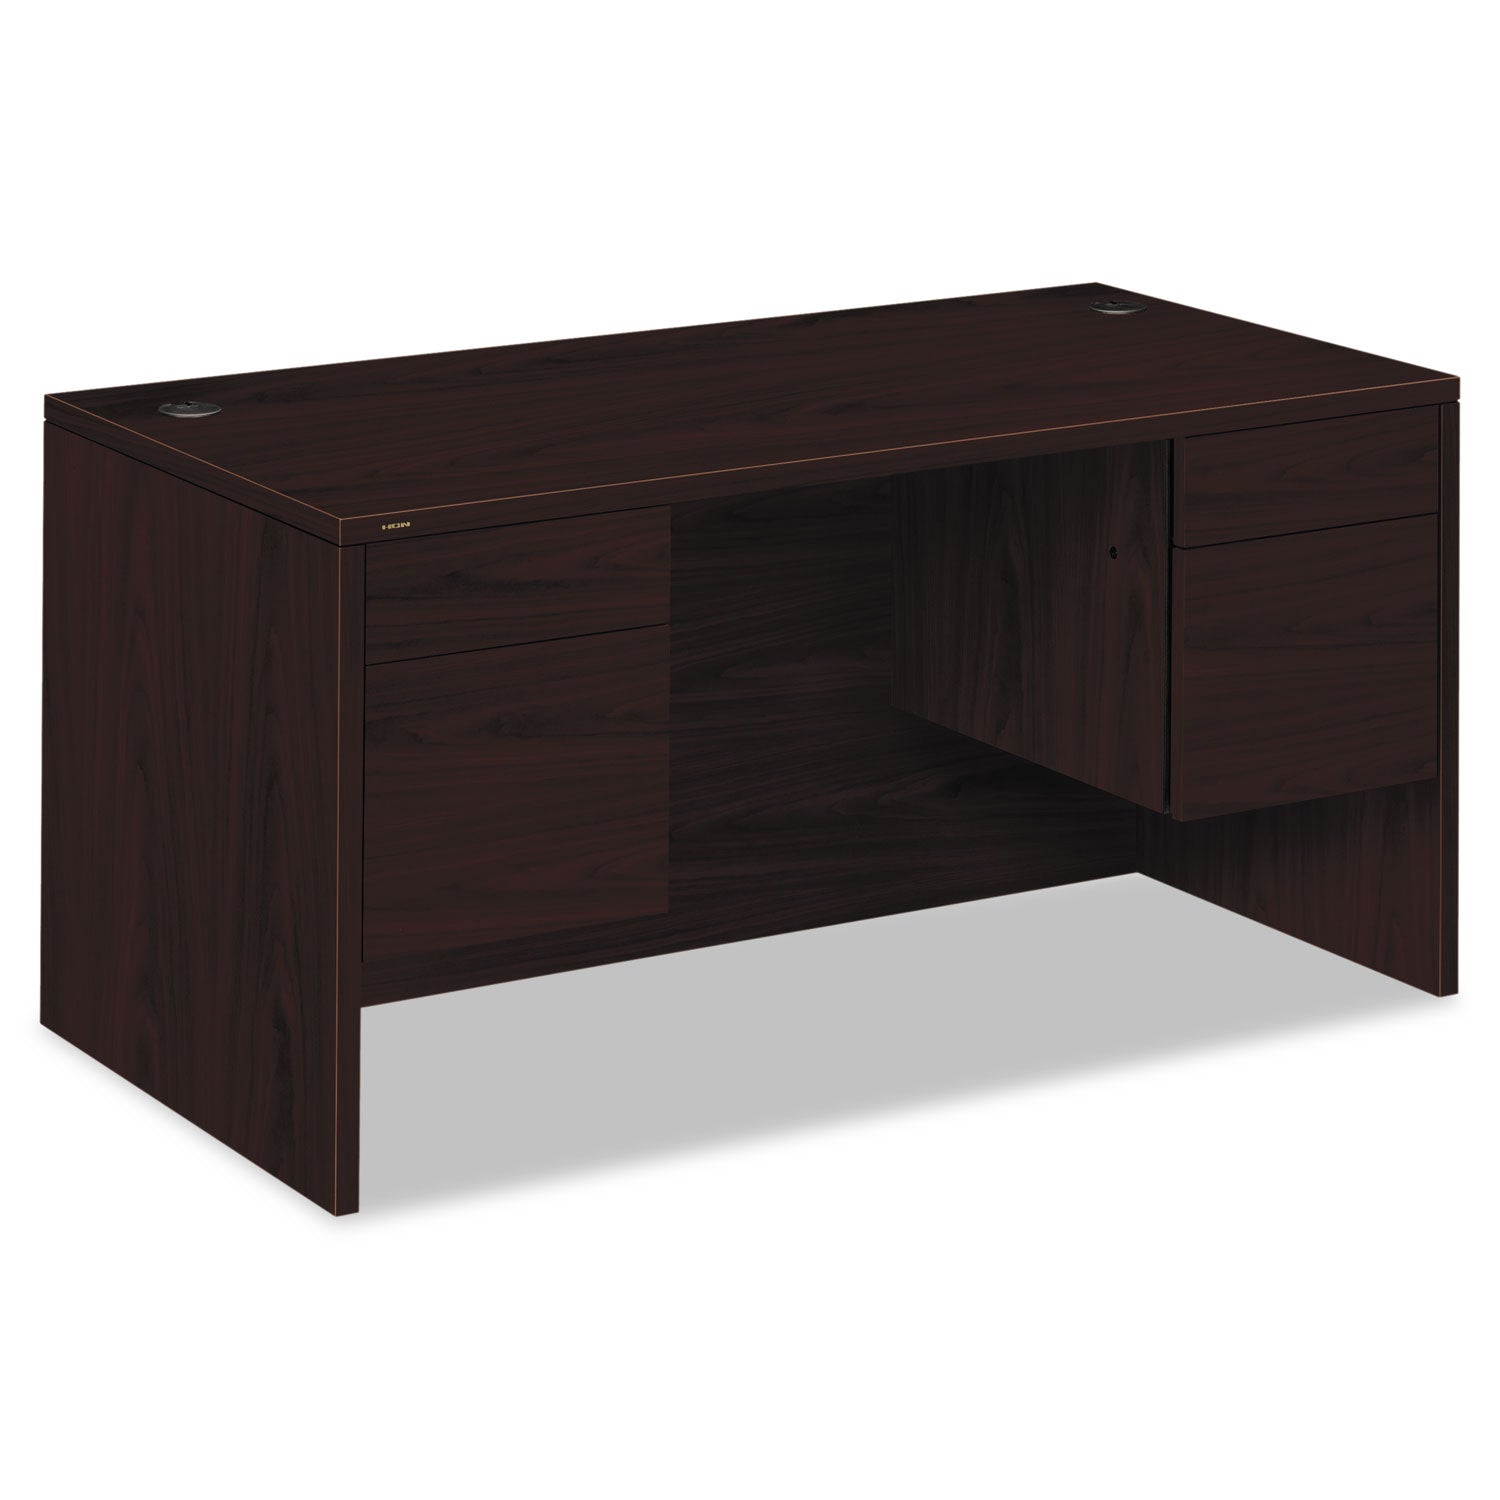 10500 Series Double 3/4-Height Pedestal Desk, Left and Right: Box/File, 60" x 30" x 29.5", Mahogany - 